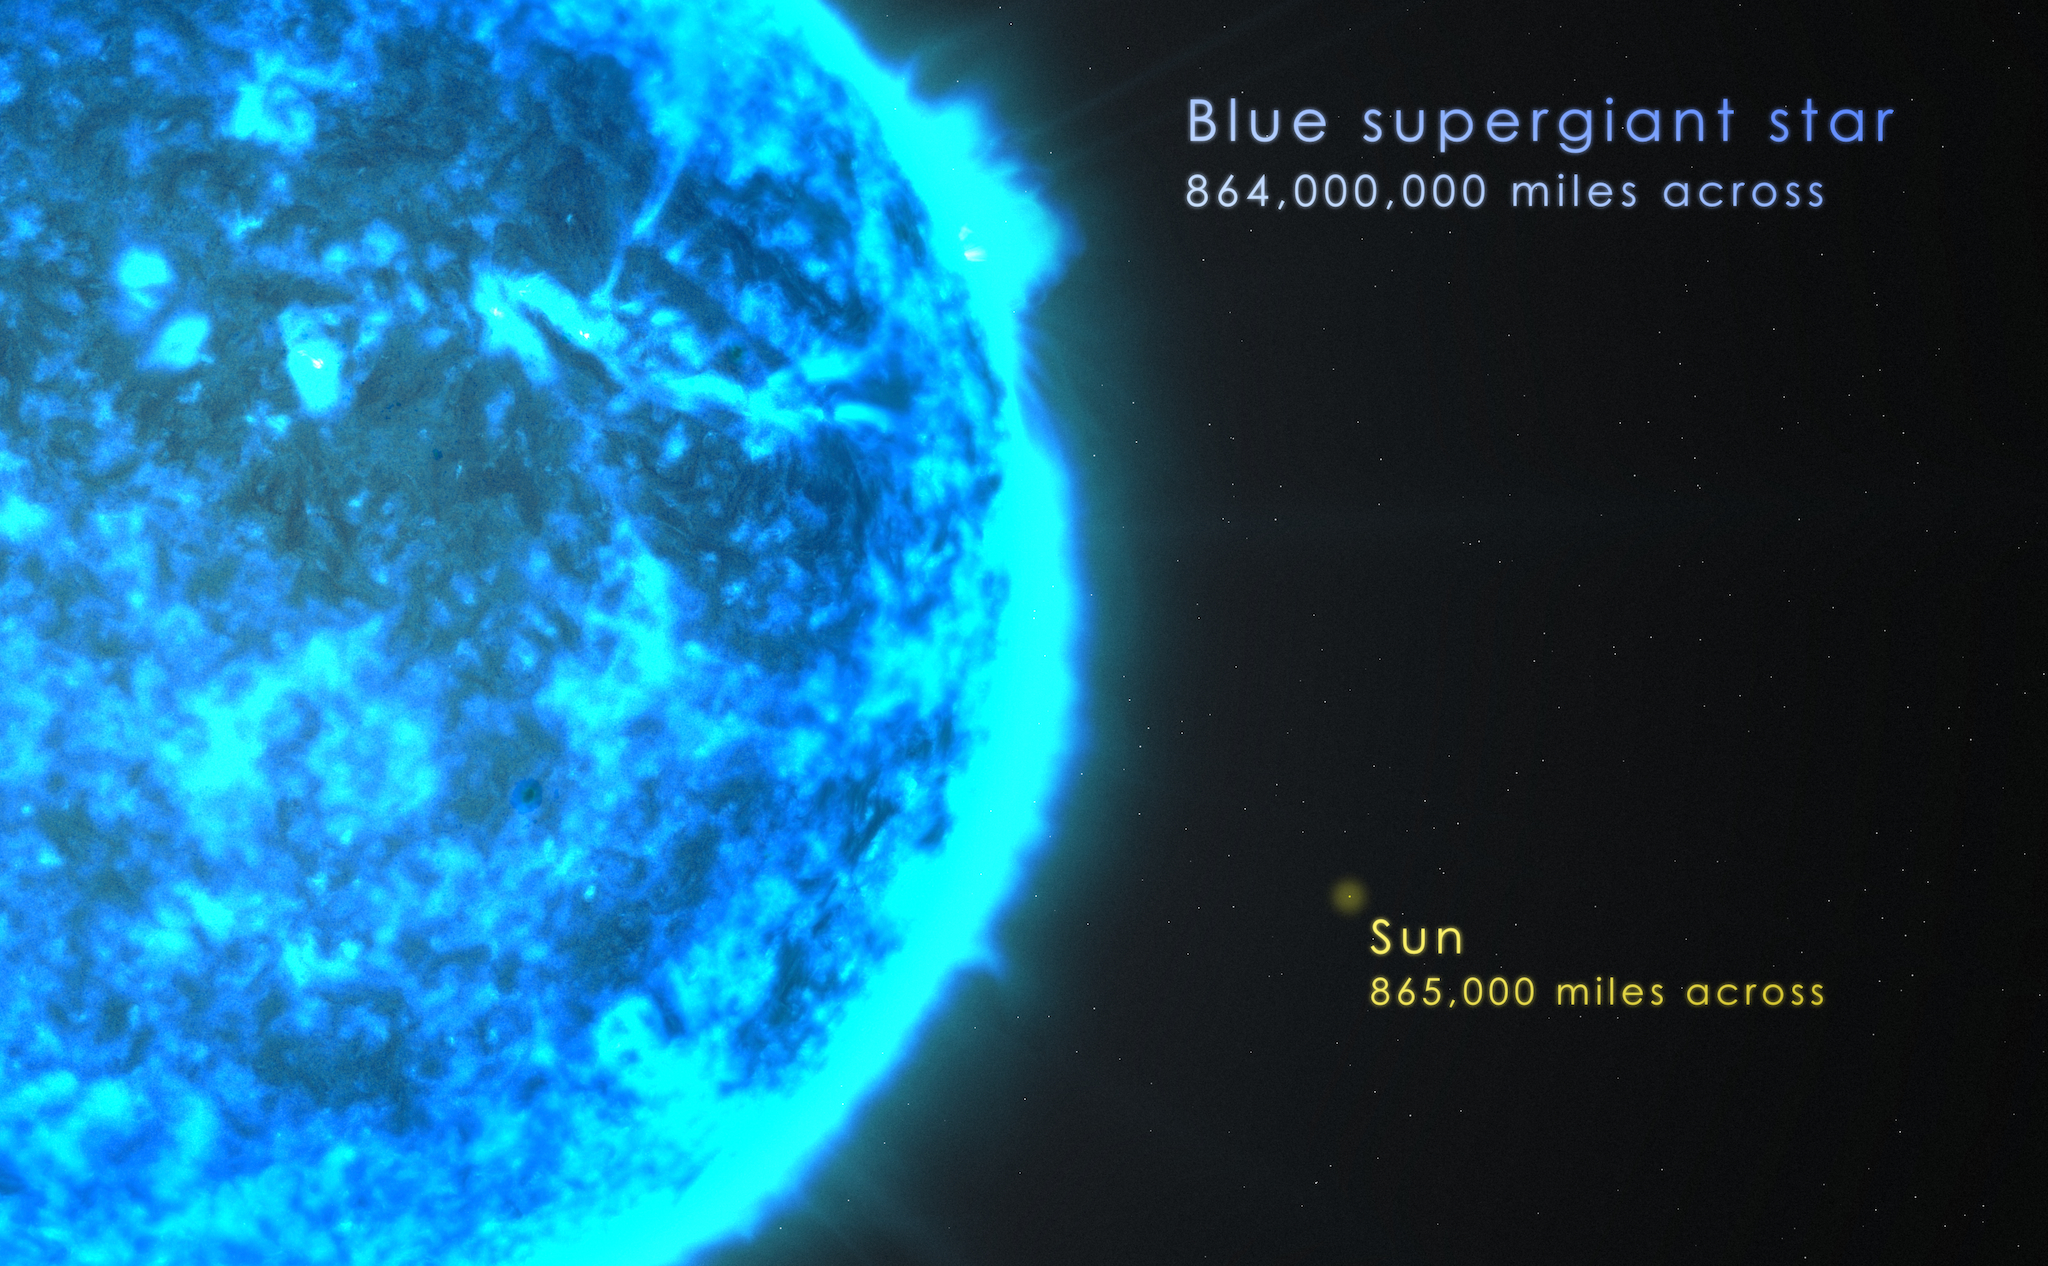 Artist's concept of a blue supergiant star